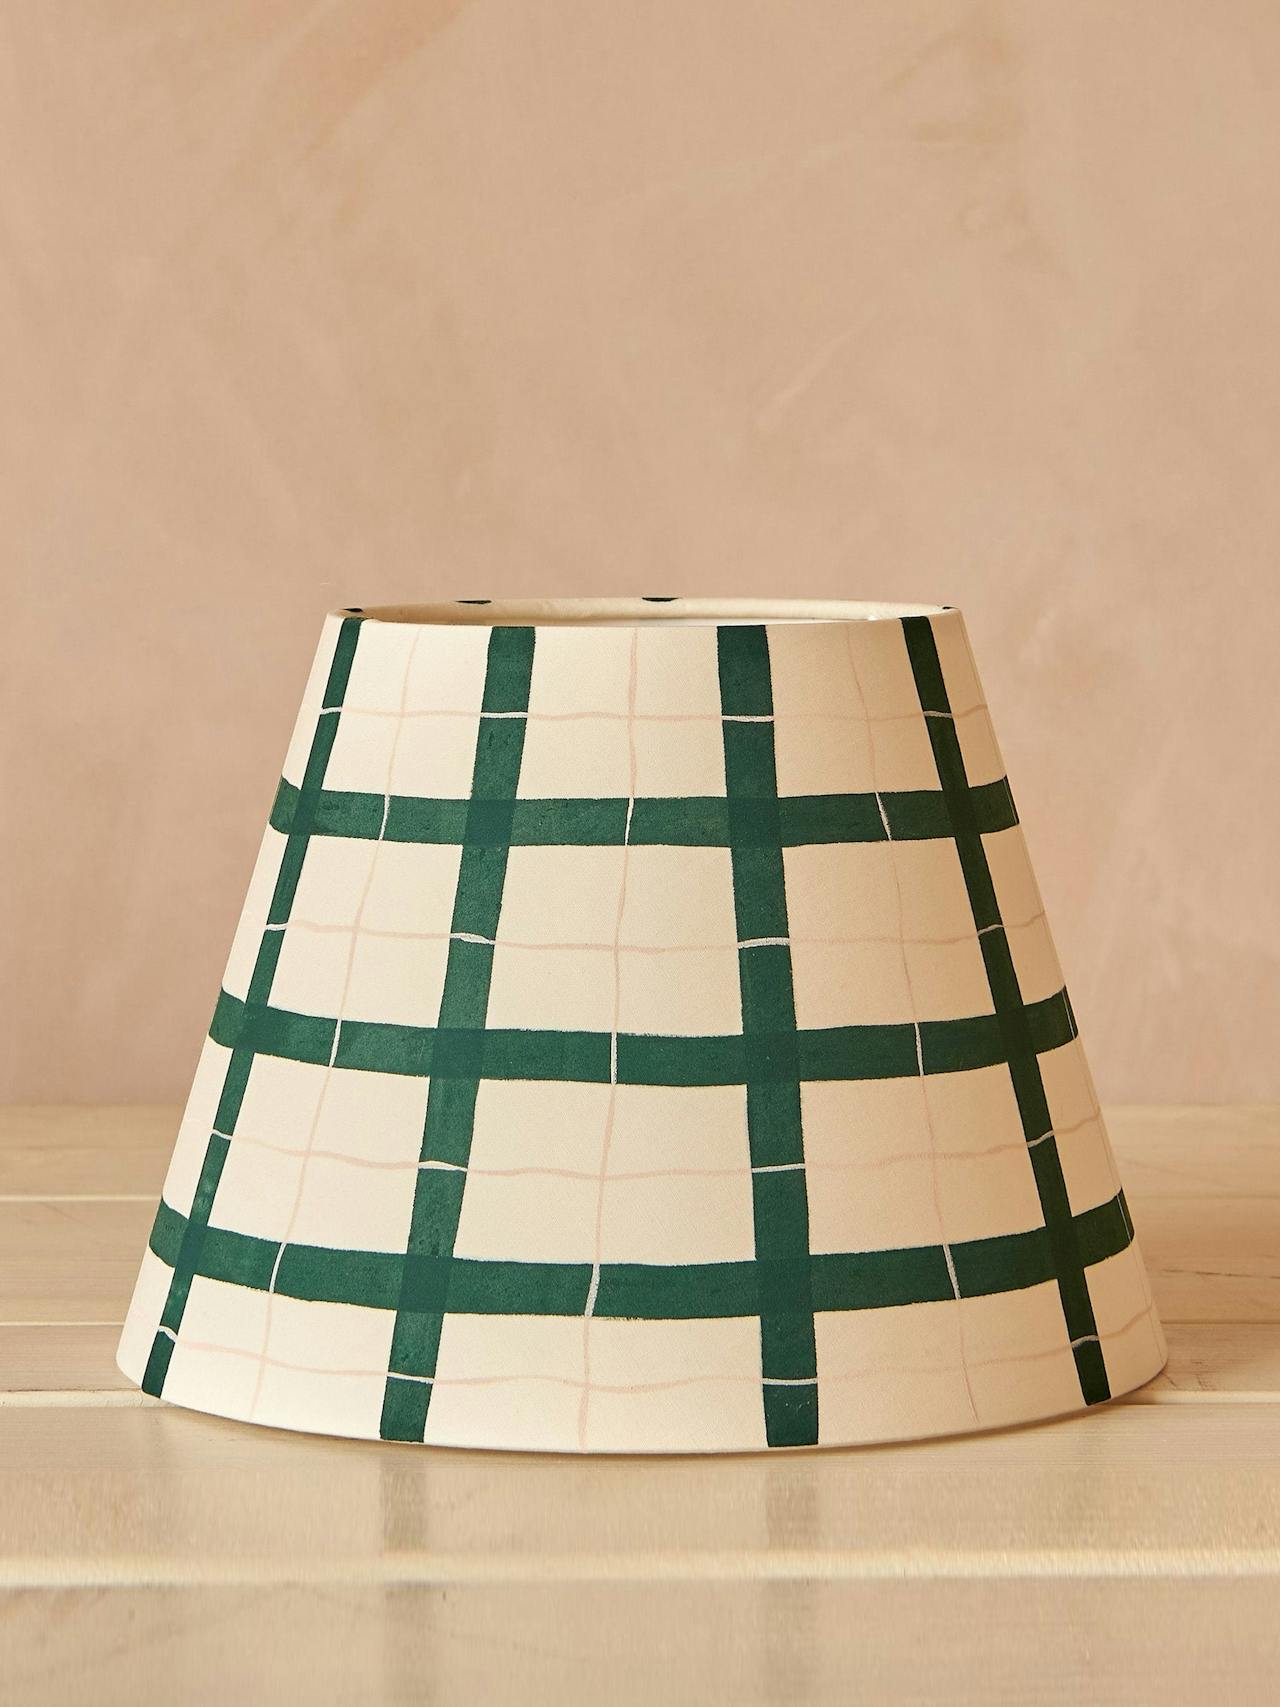 Green and pink gingham lampshade